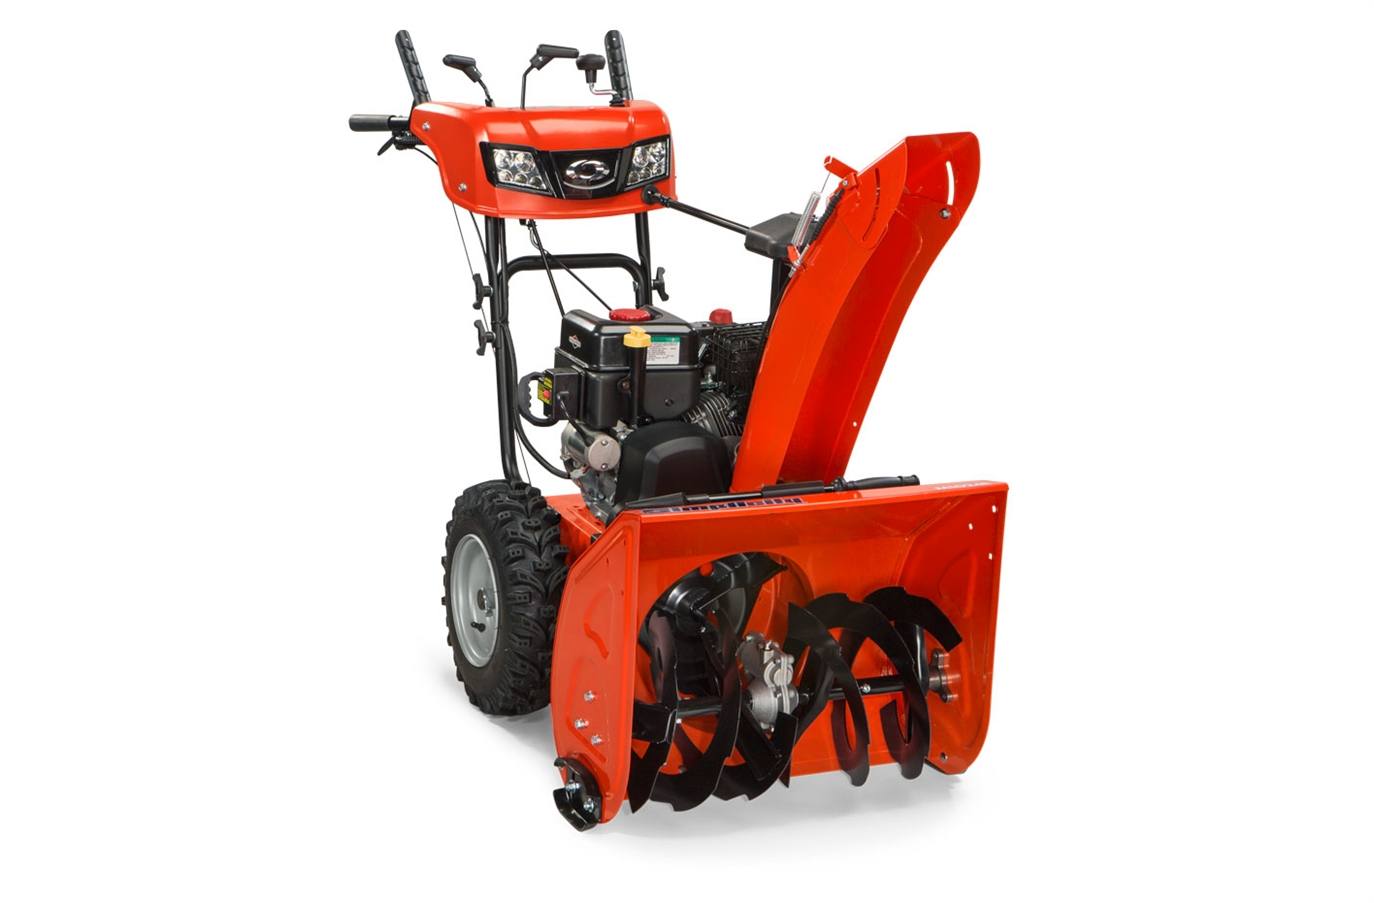 SNOWTHROWER, DUAL STAGE BRIGGS AND STRATTON